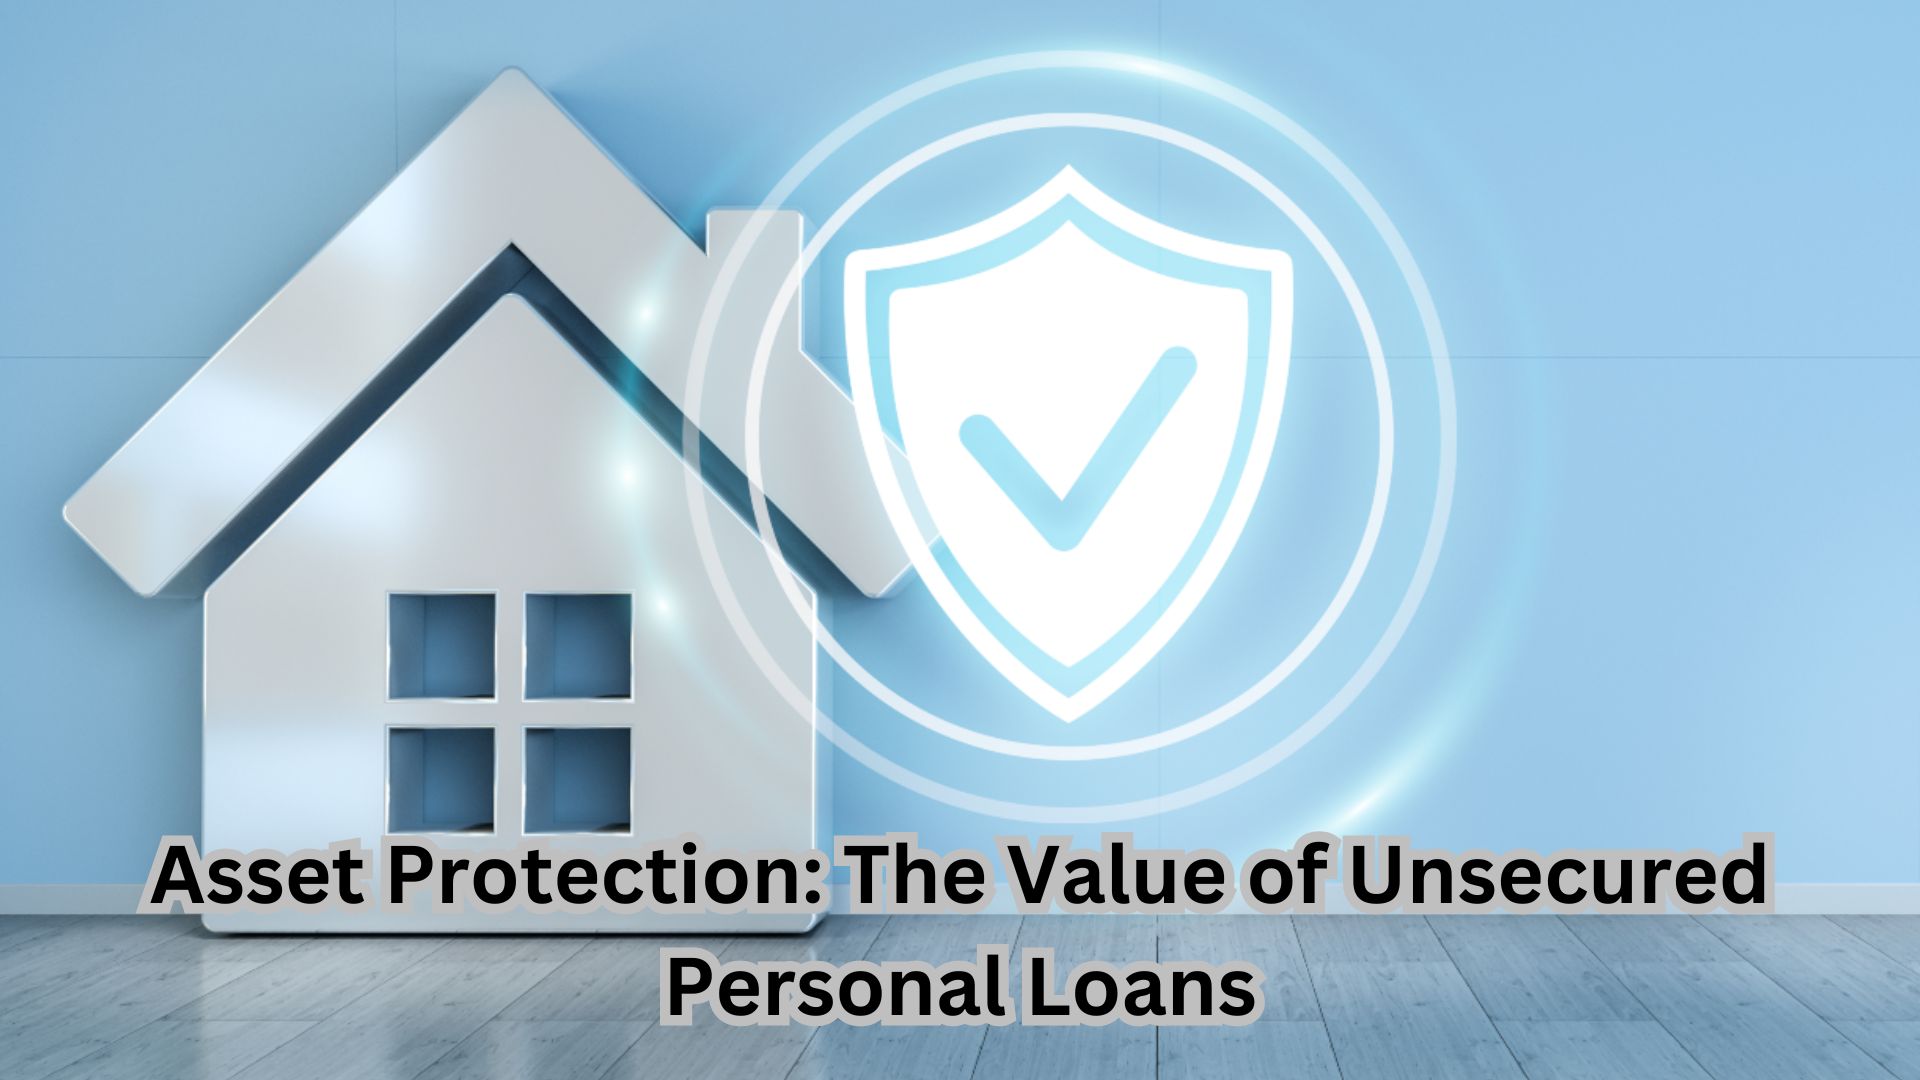 Asset Protection The Value of Unsecured Personal Loans.